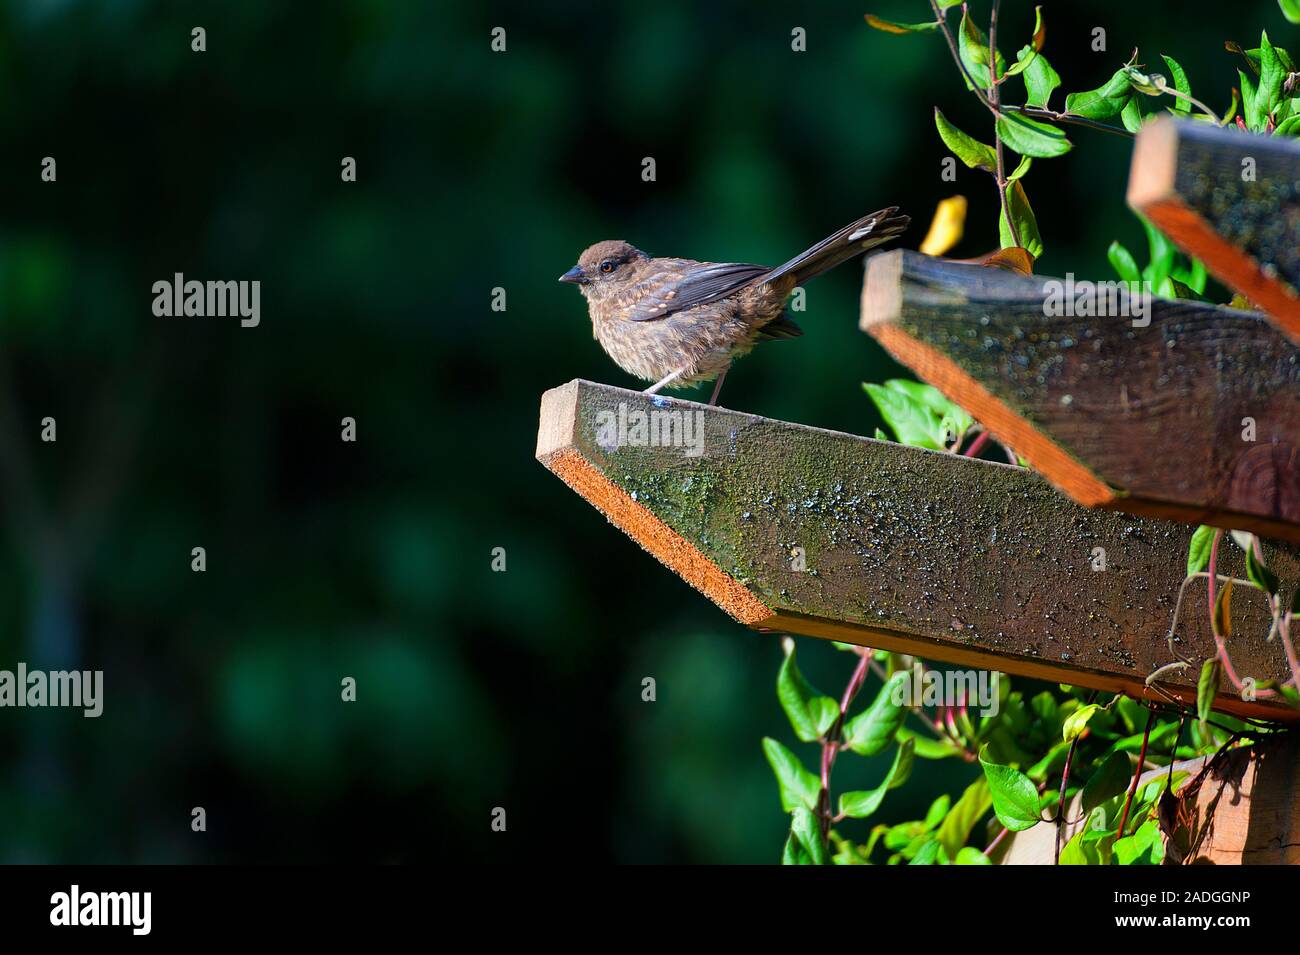 On a garden arbor with vine growing on it, sits a little brown bird. Stock Photo